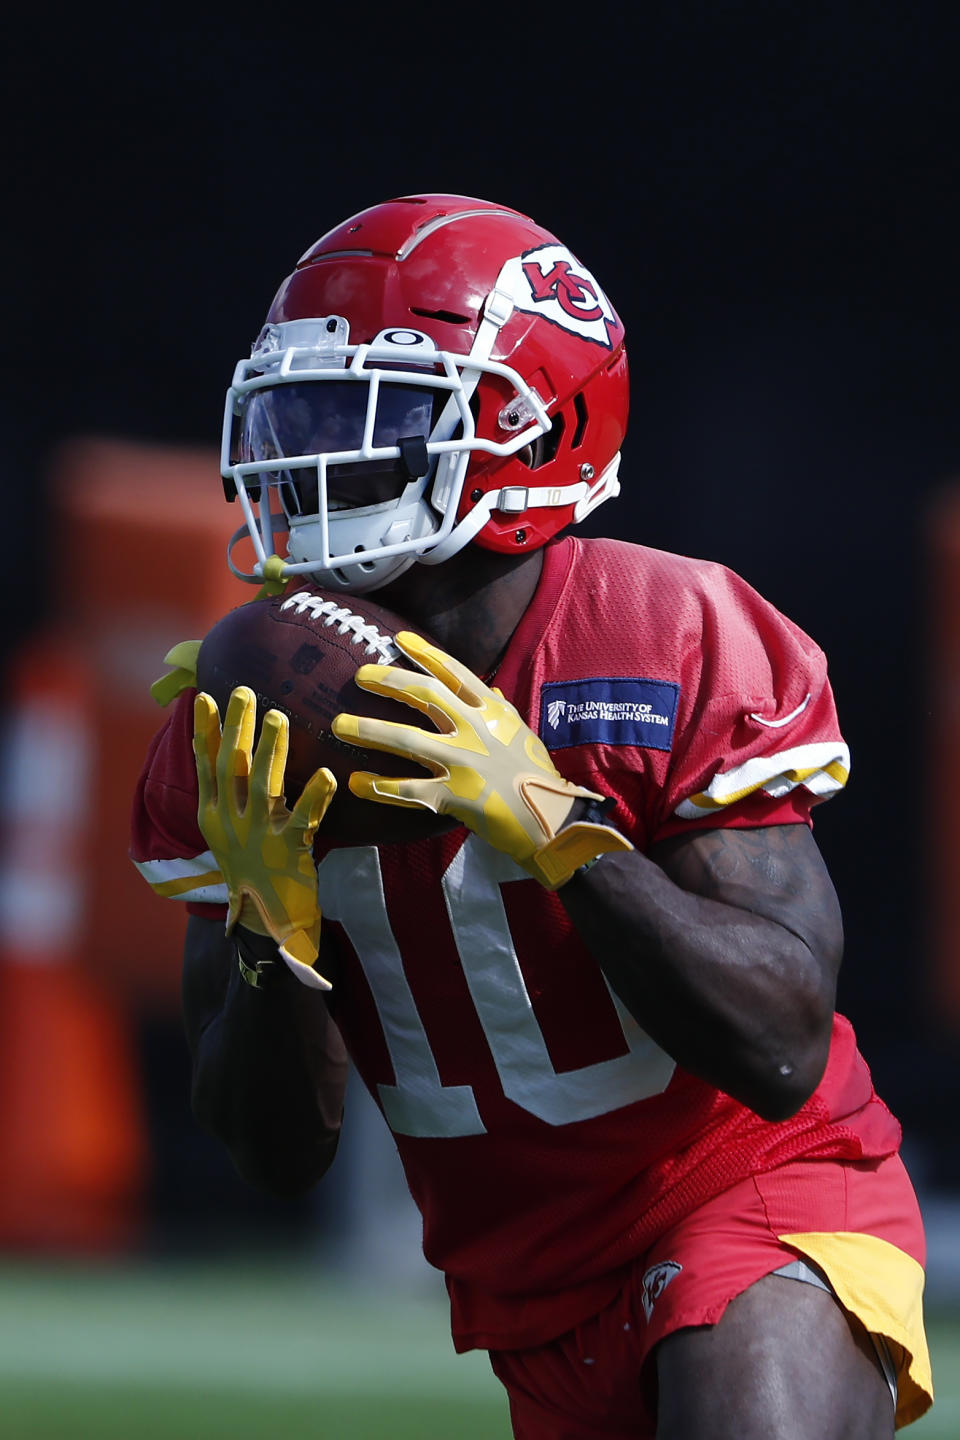 Kansas City Chiefs wide receiver Tyreek Hill (10) catches the ball during practice on Thursday, Jan. 30, 2020, in Davie, Fla., for the NFL Super Bowl 54 football game. (AP Photo/Brynn Anderson)